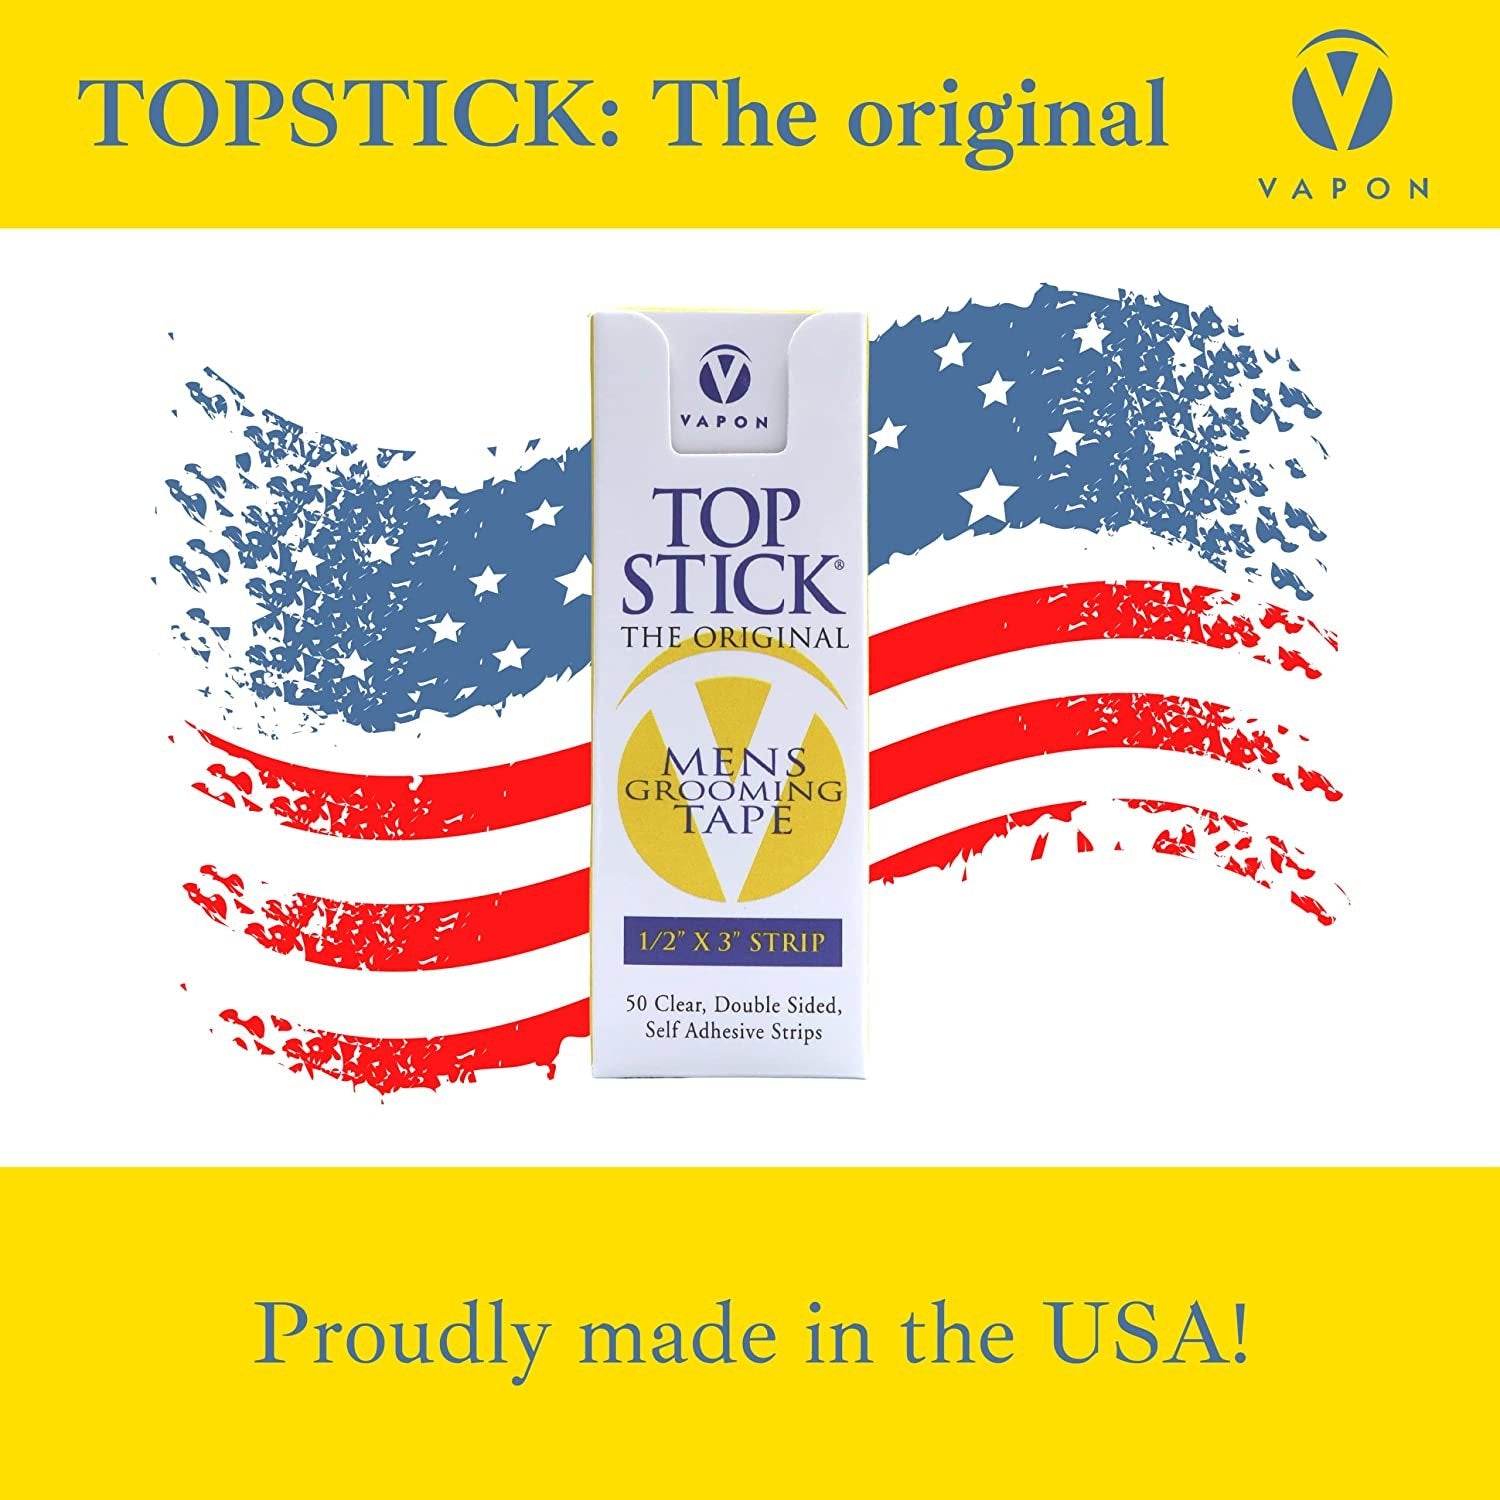 Vapon Topstick - The Original Men's Grooming Tape - 50 Count 1/2" x 3" Double Sided, Self Adhesive, Clear Tape for Toupee and Wig Adhesion - Hypo Allergenic, Waterproof, and Latex Free